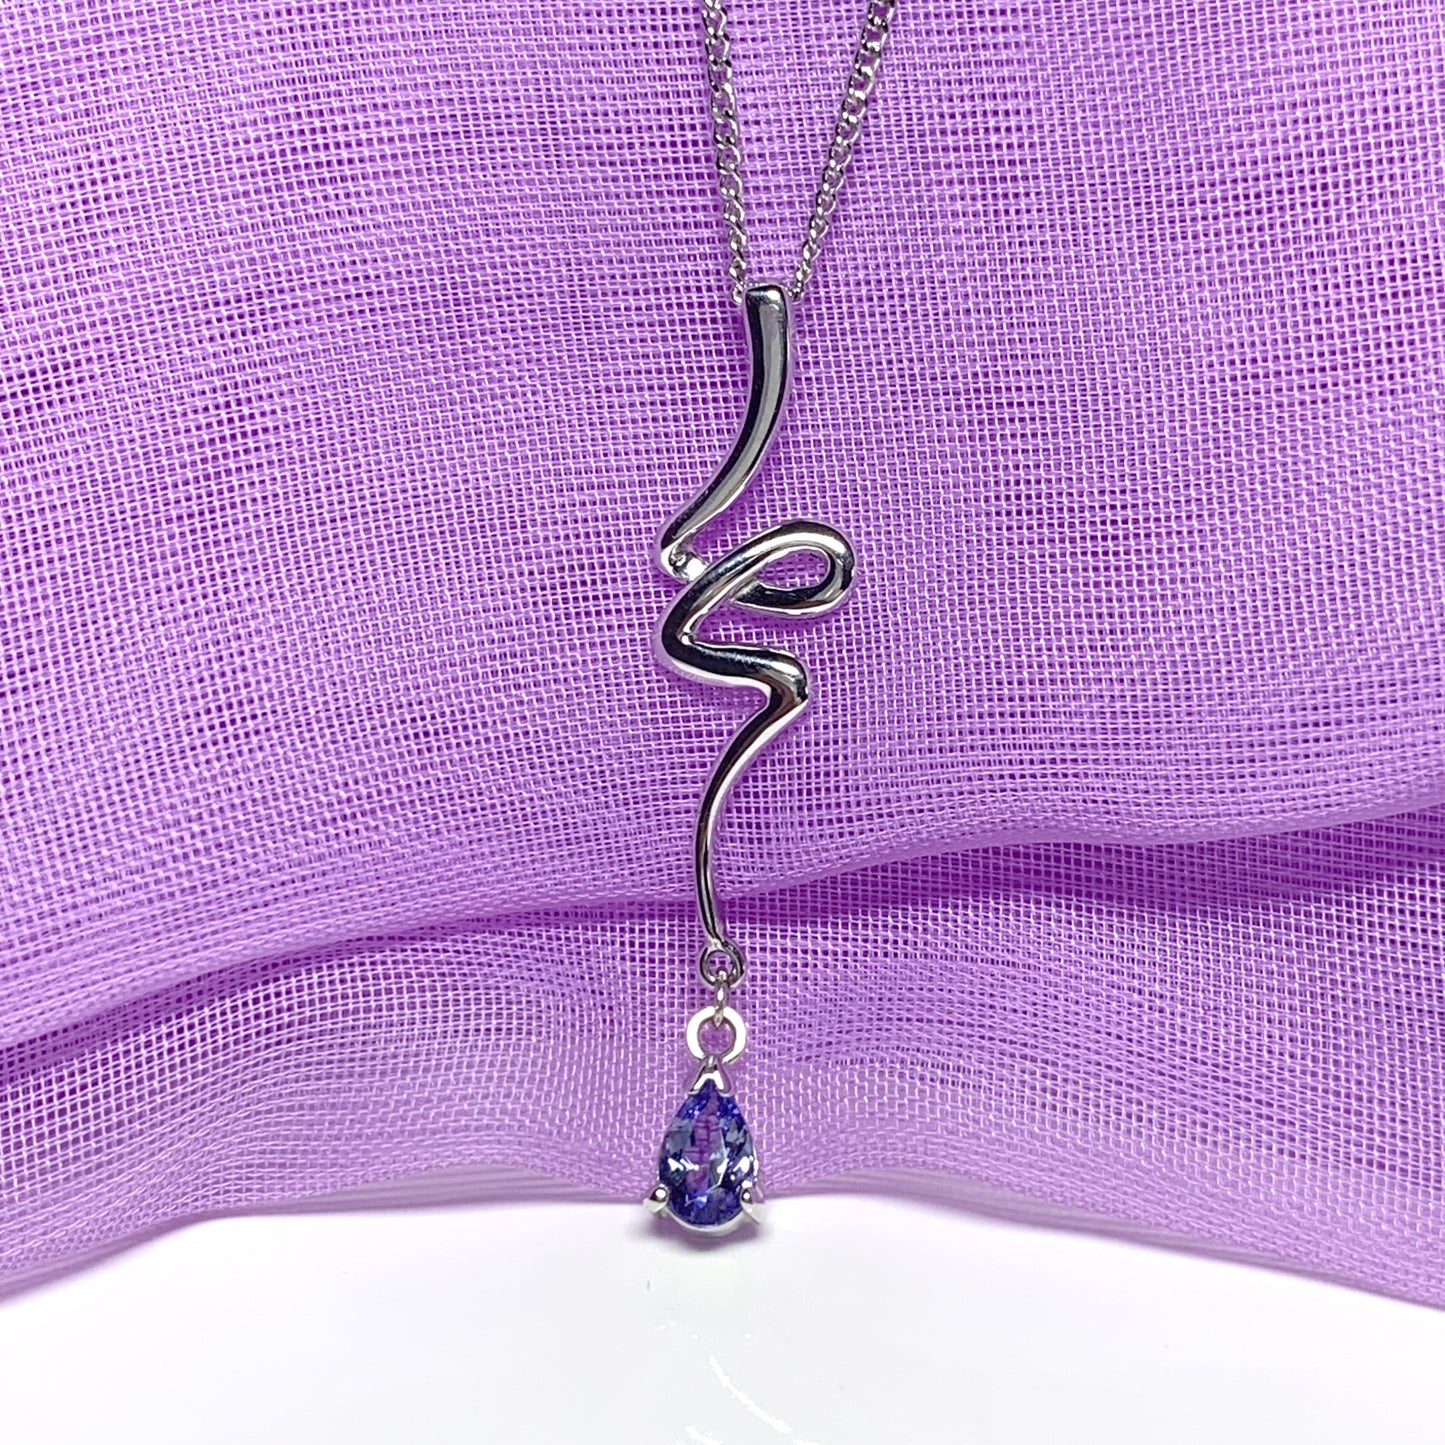 Real tanzanite white gold fancy swirl necklace pear shaped